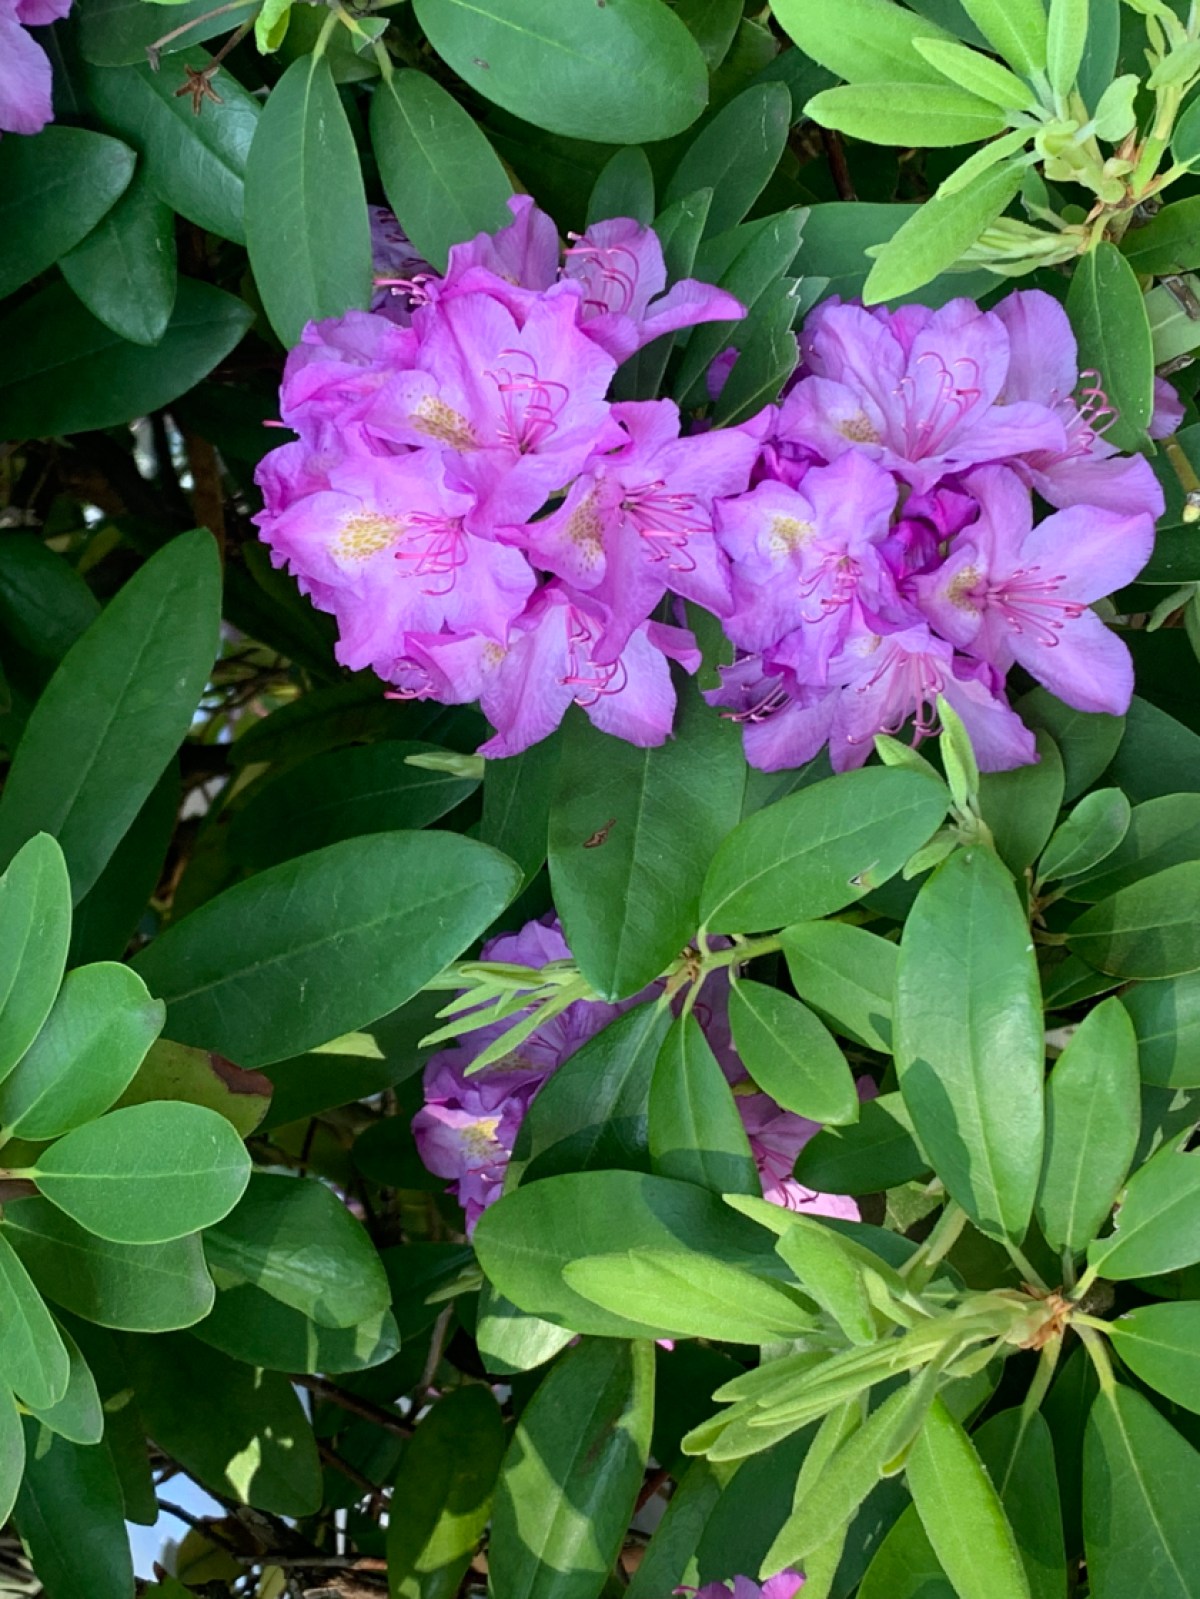 Purple flowers on a plant with long green leaves.